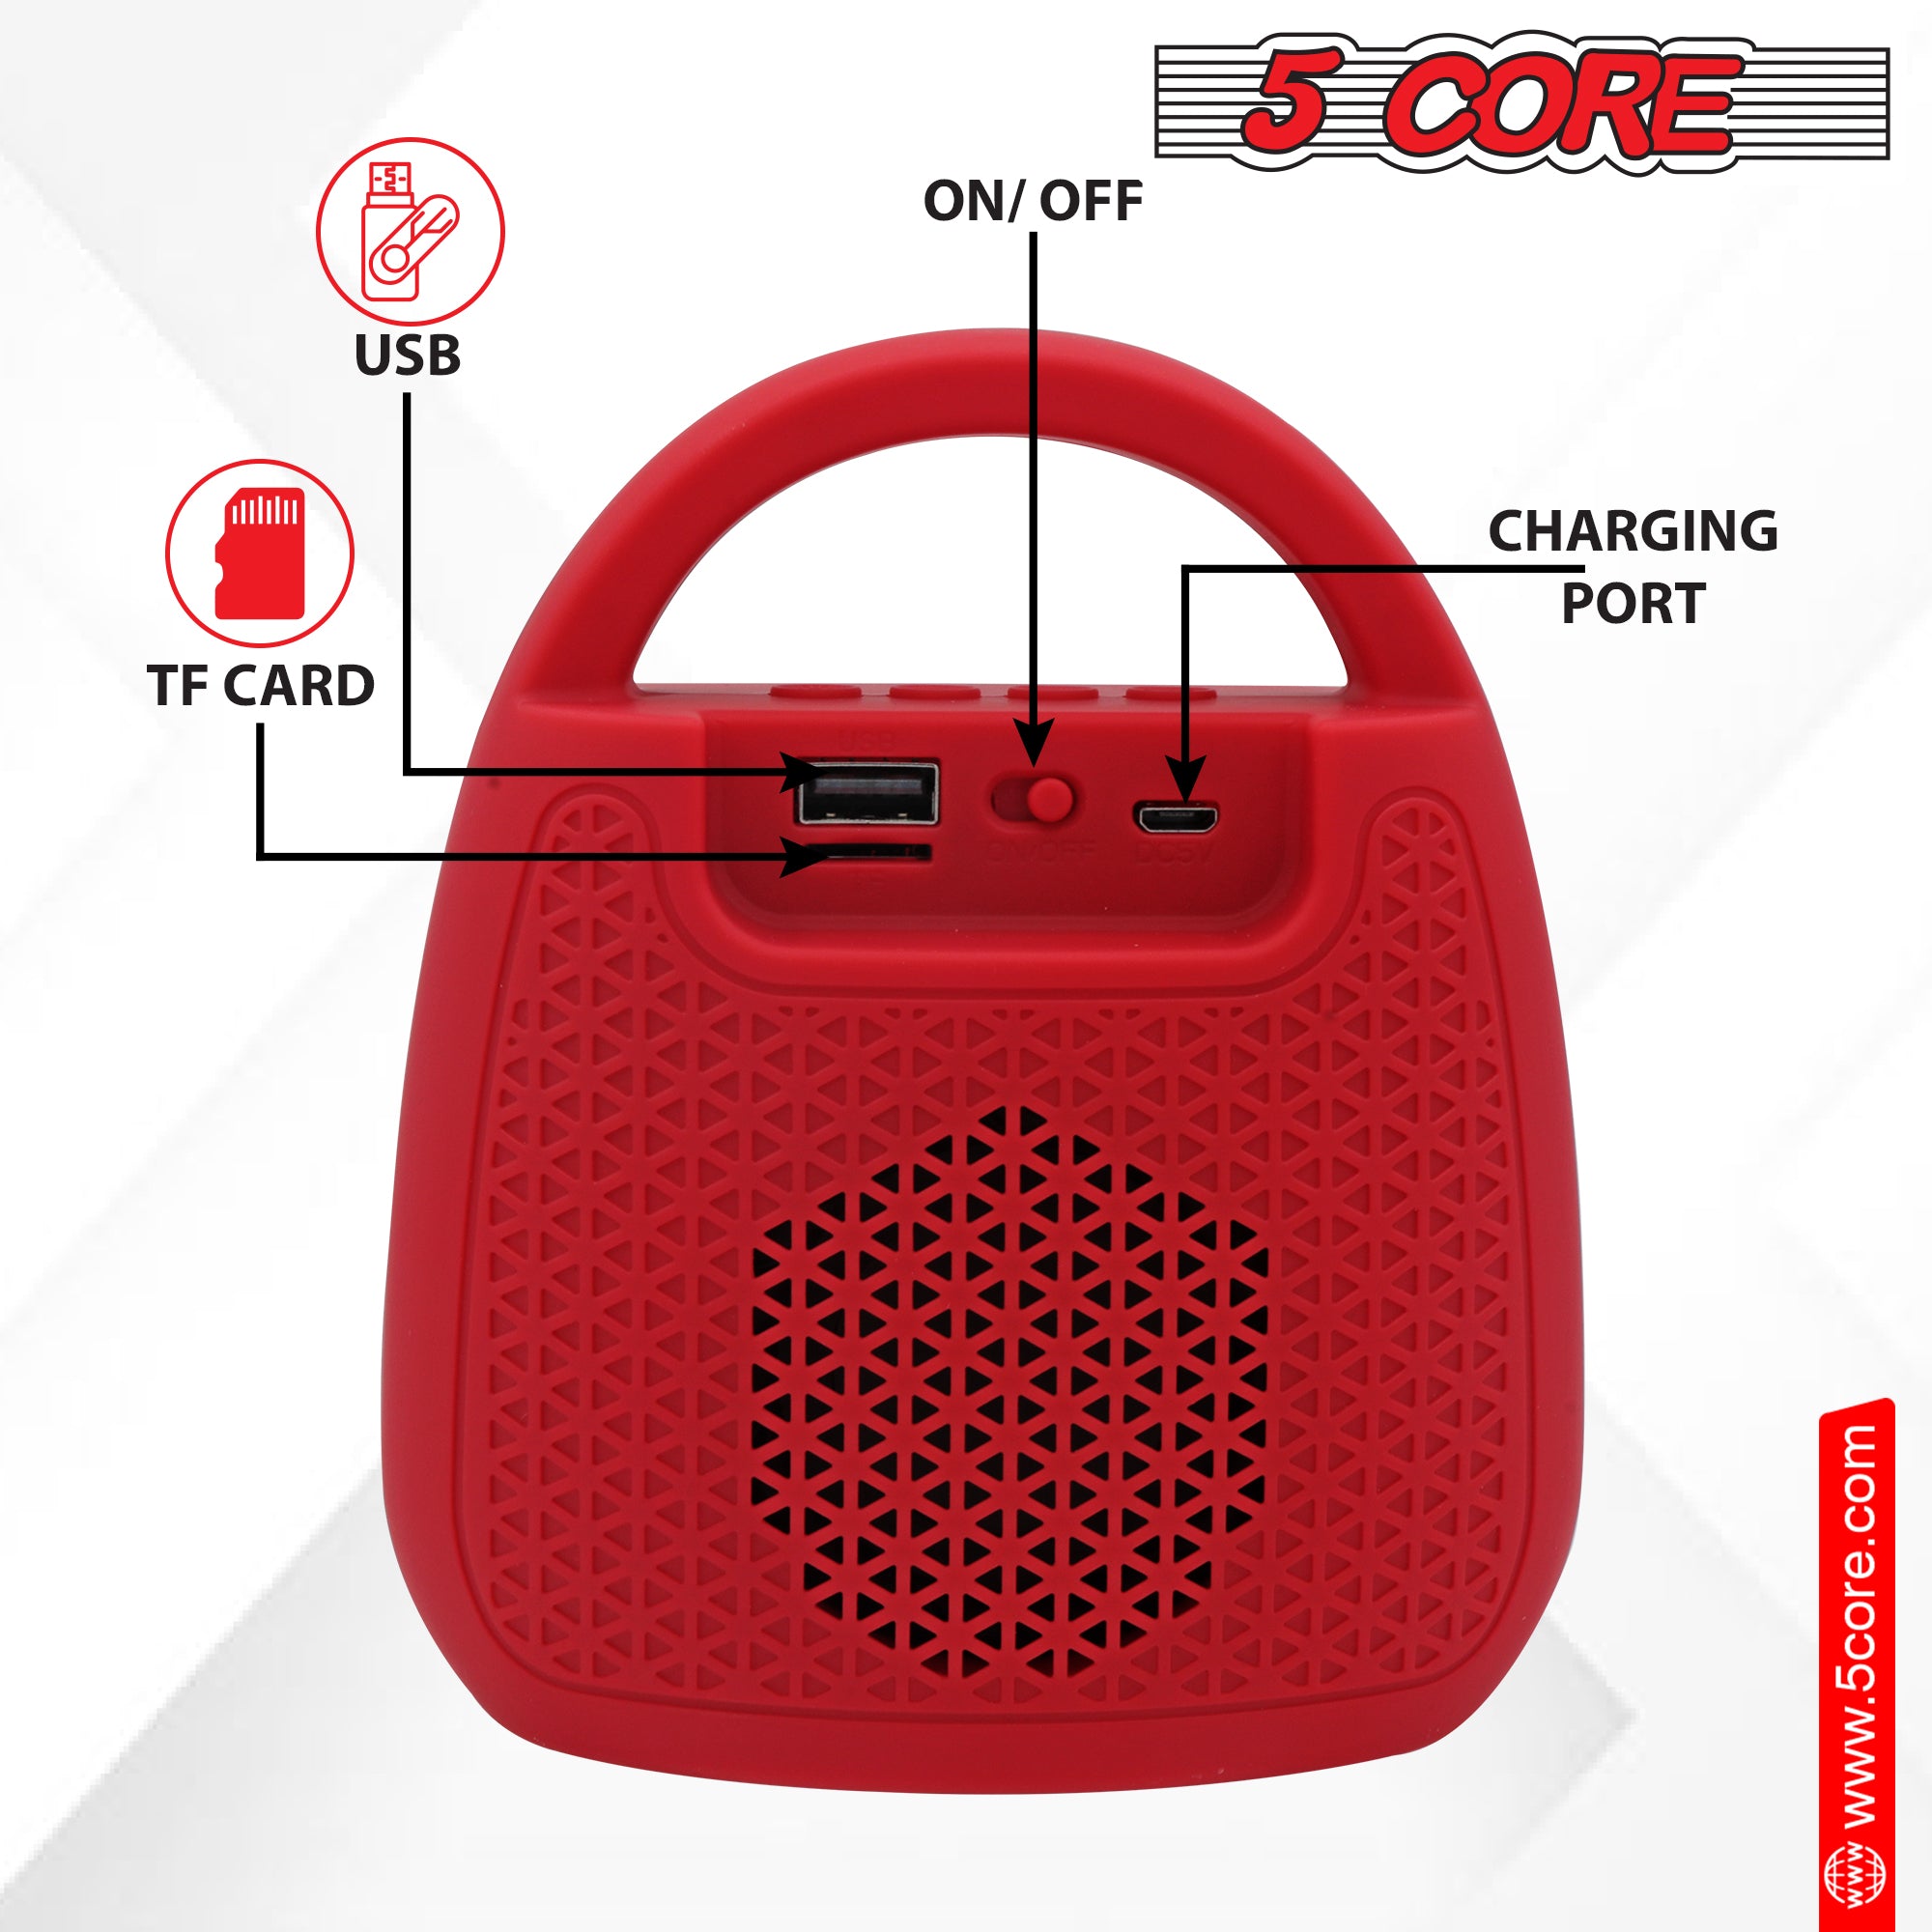 5 Core Bluetooth Speaker w multi function features